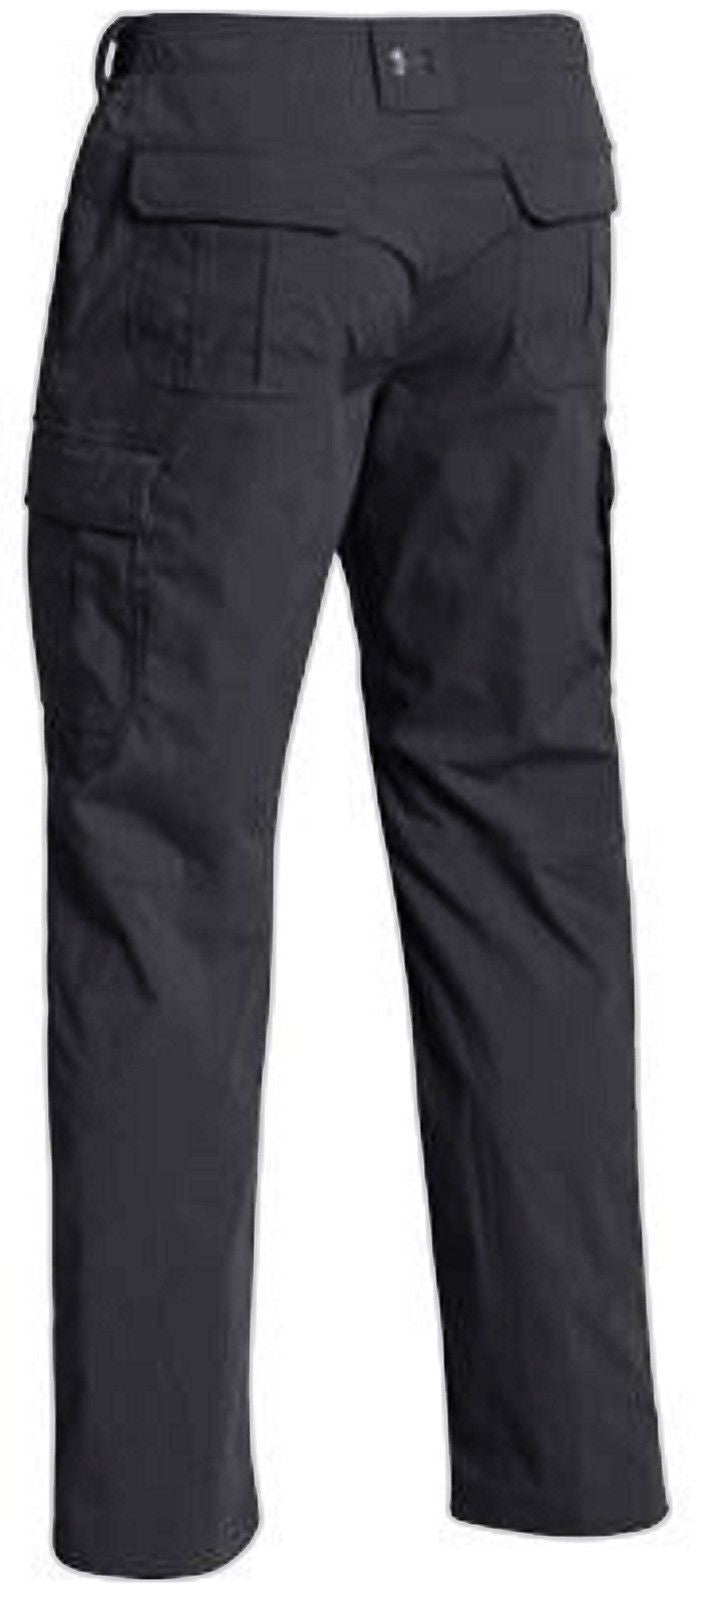 Under Armour Tactical Patrol Pants II - Conceal Carry Field Duty